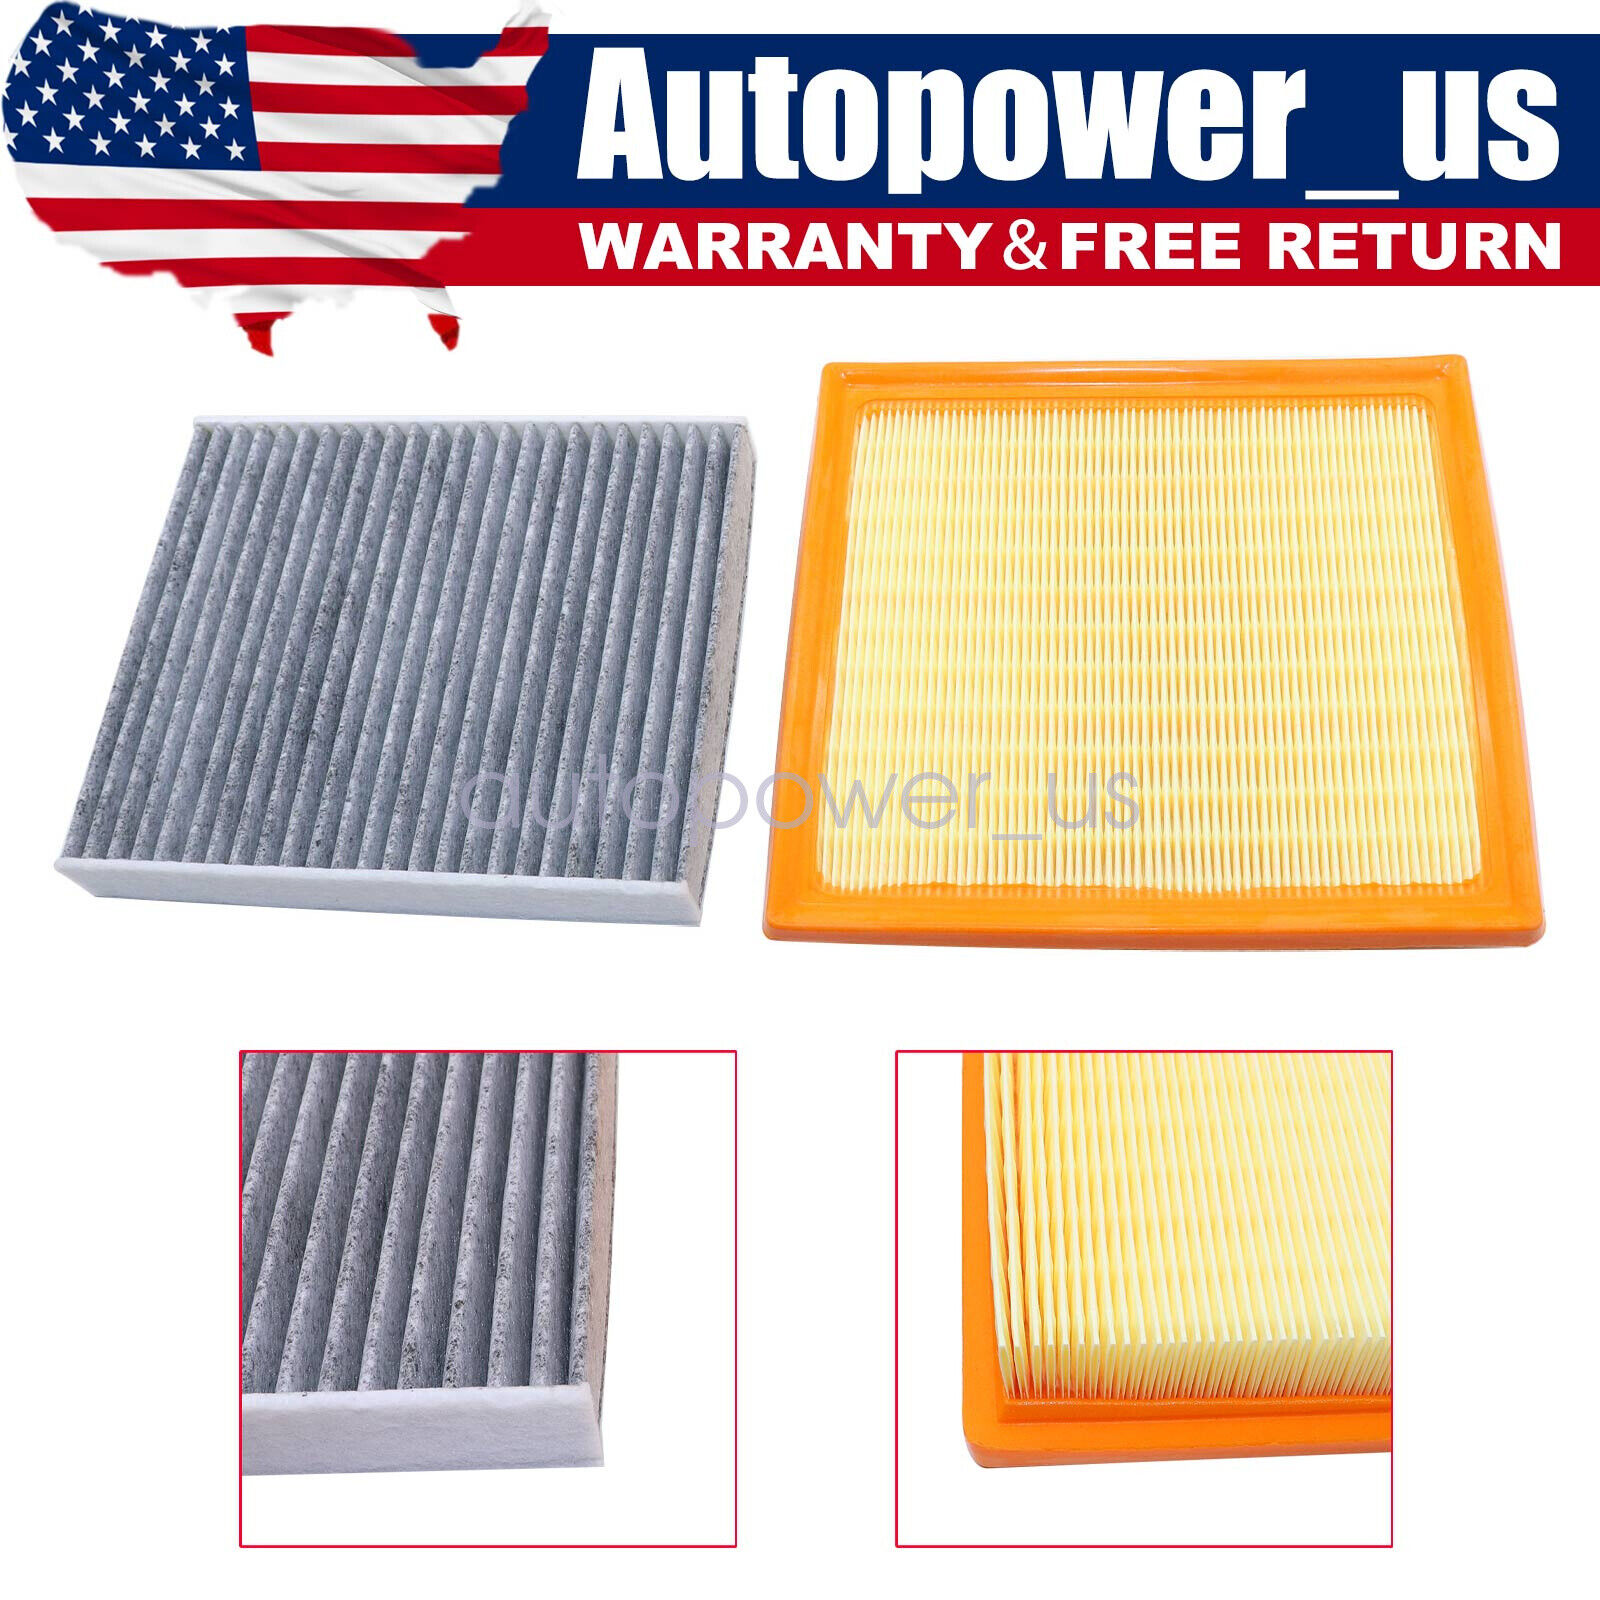 COMBO Air Filter+ CHARCOAL Cabin Filter for NEW IMPREZA ASCENT CROSSTREK OUTBACK